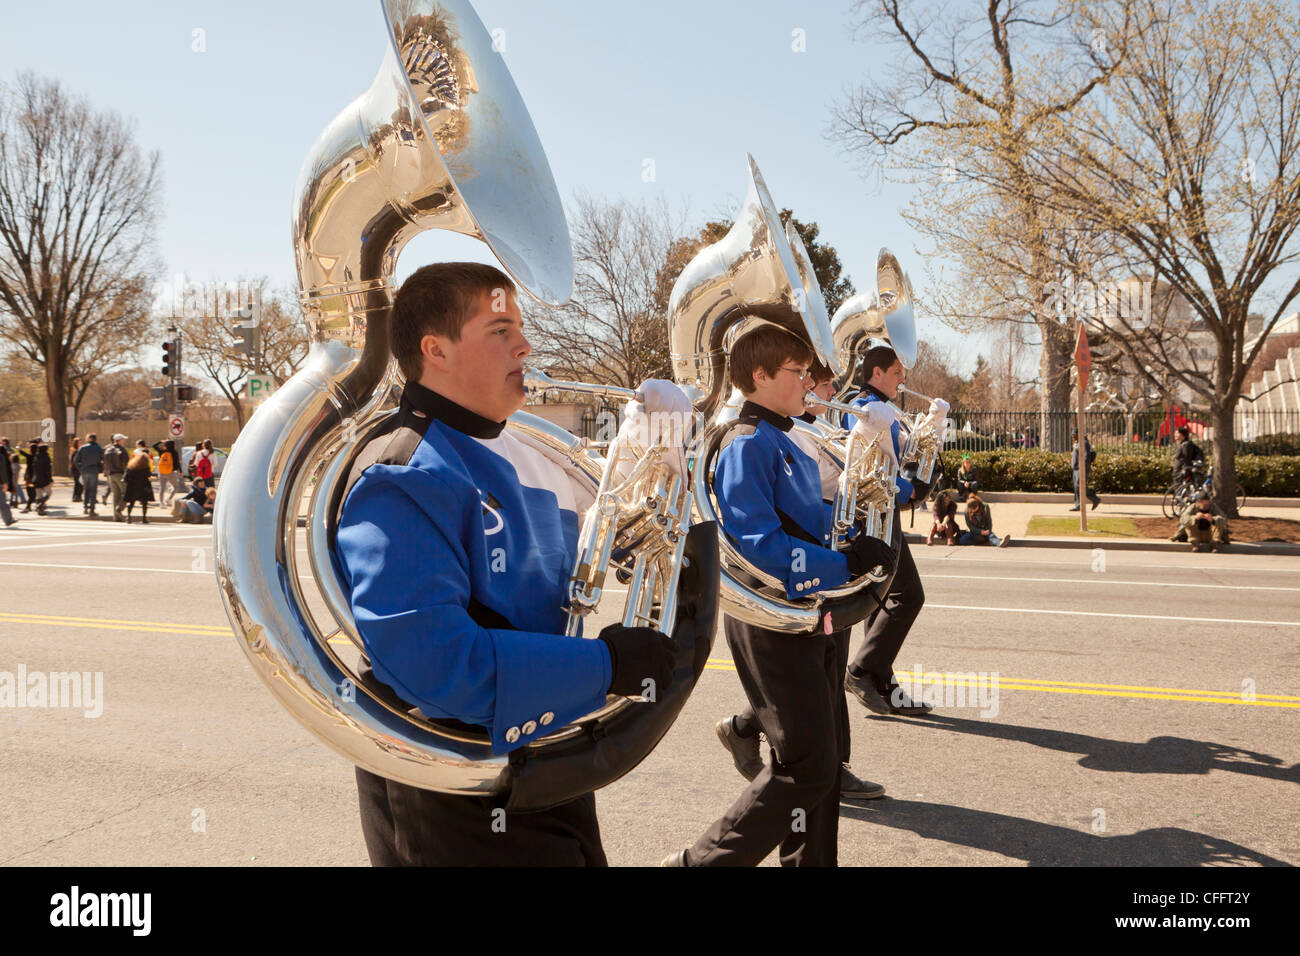 Sousaphone section of high school marching band - USA Stock Photo